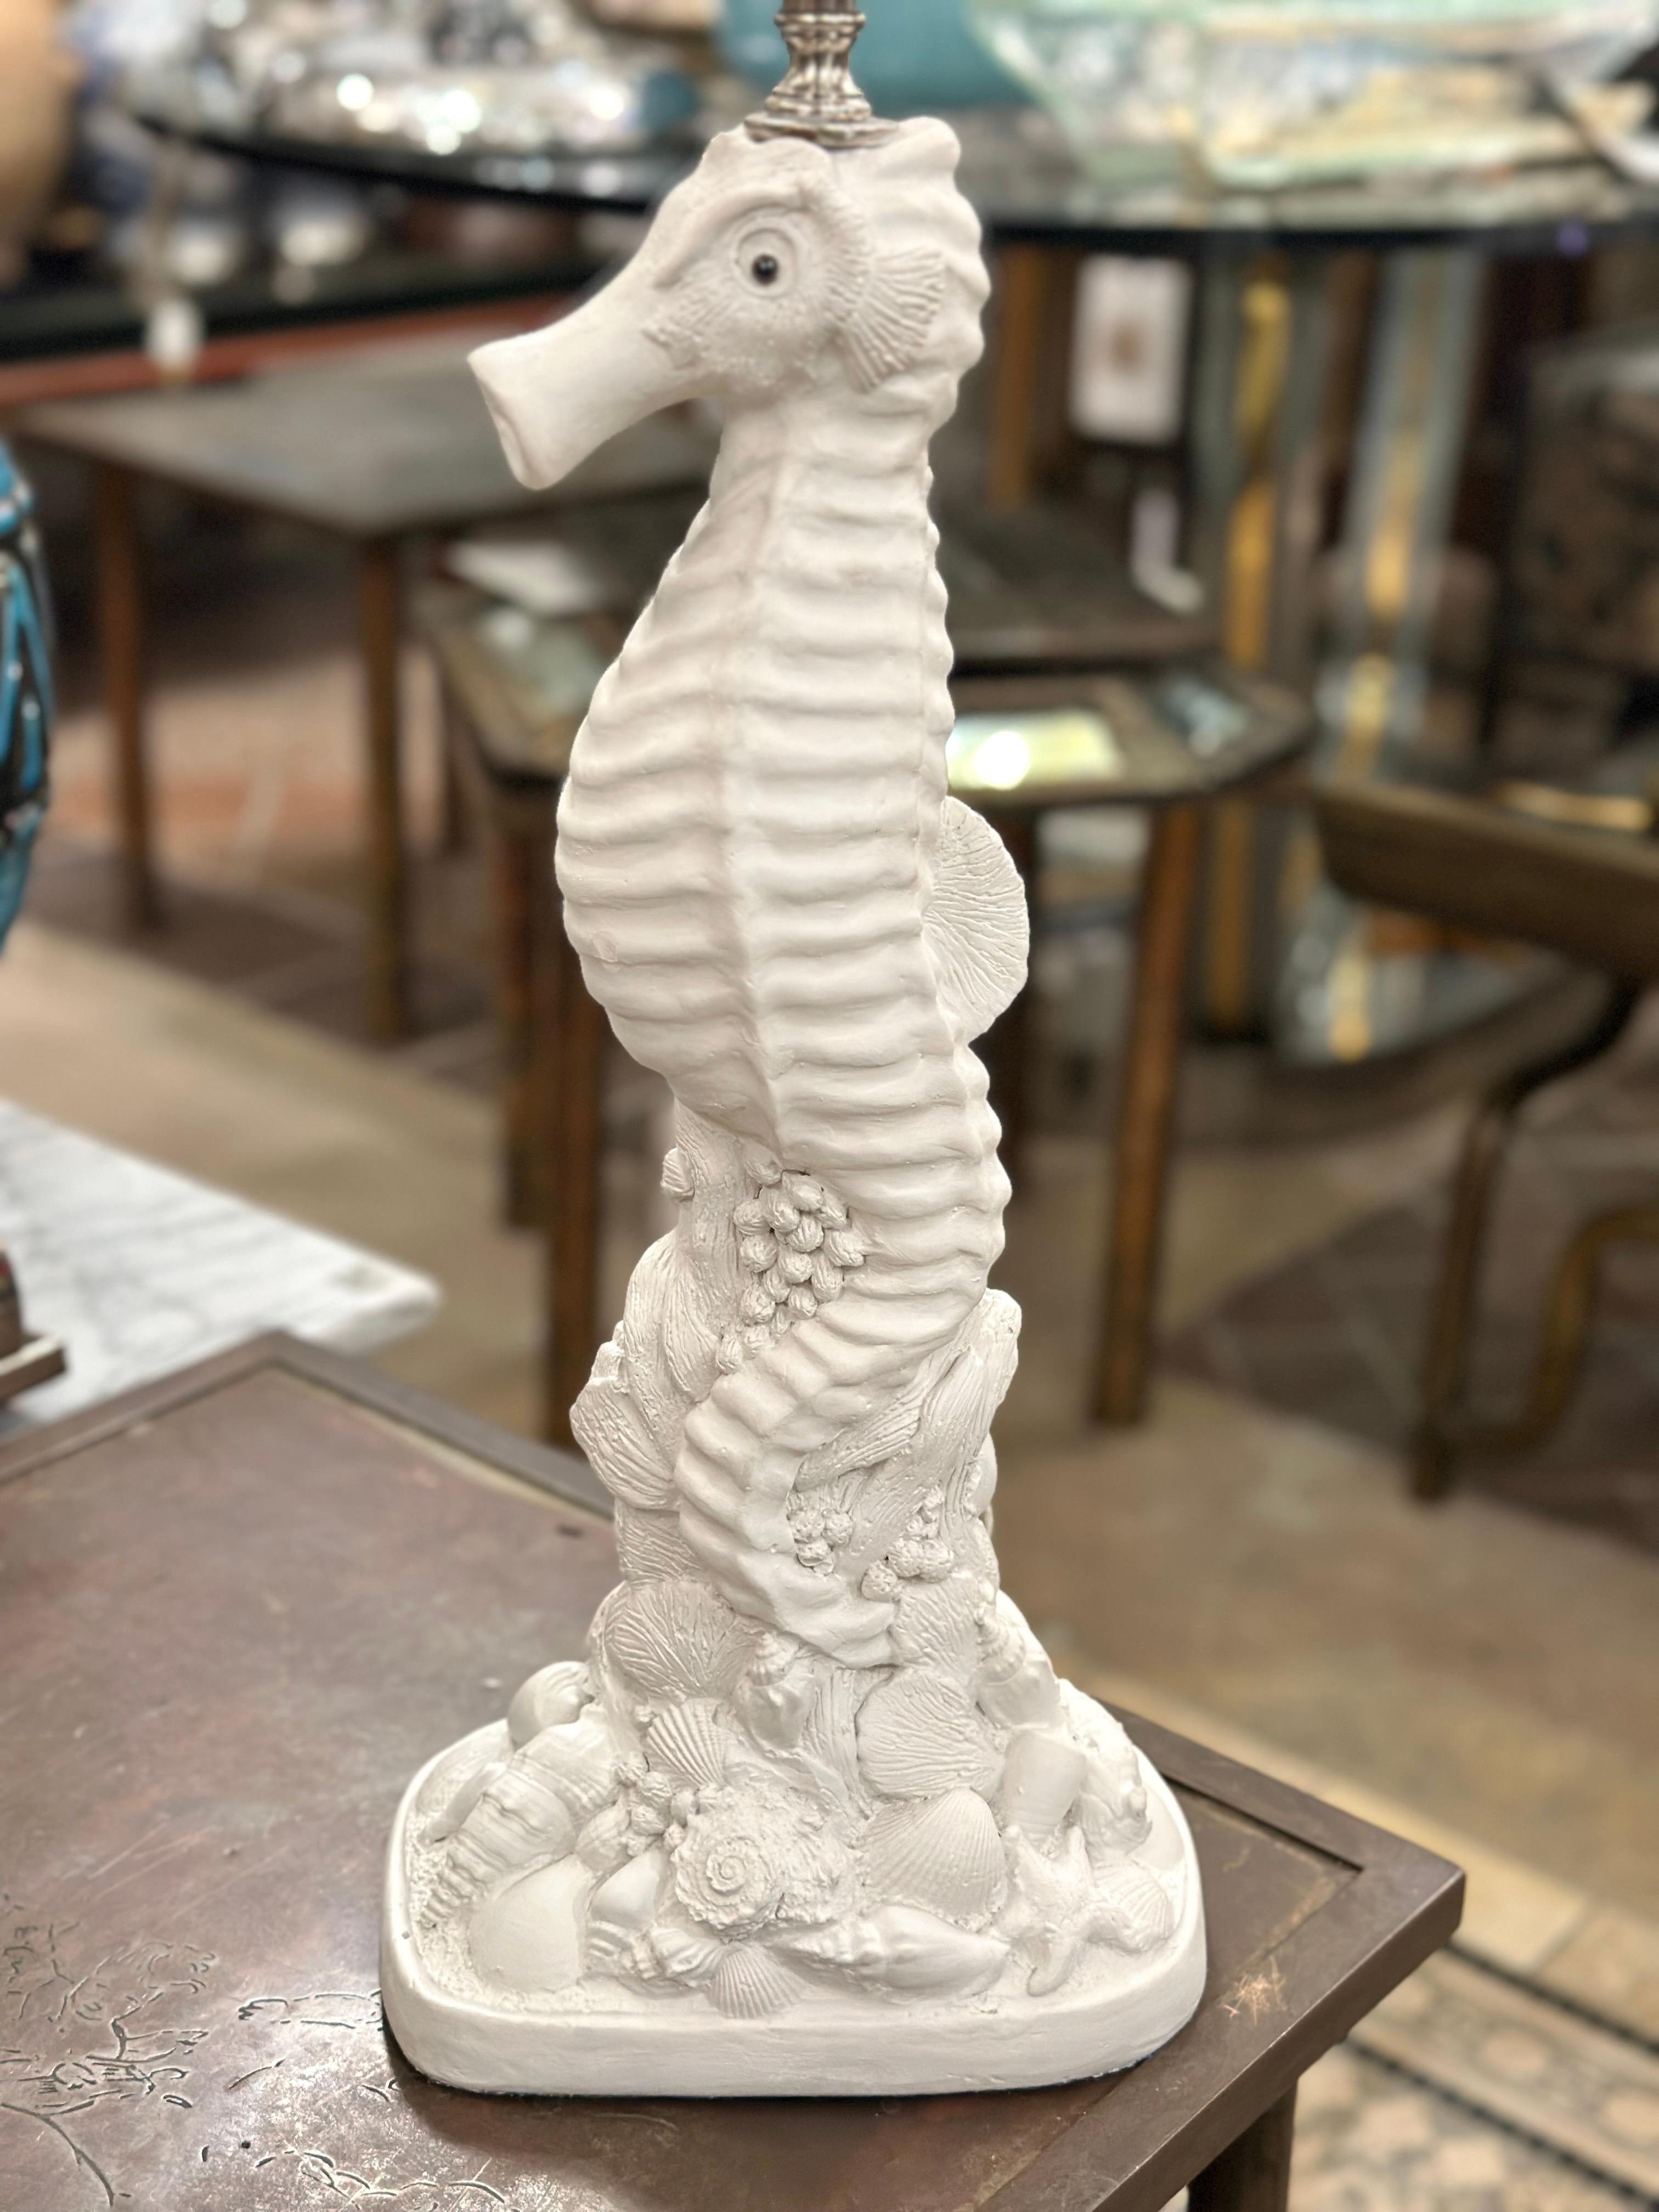 A single circa 1960's Italian plaster seahorse table lamp.

Measurements:
Height of body: 17.5